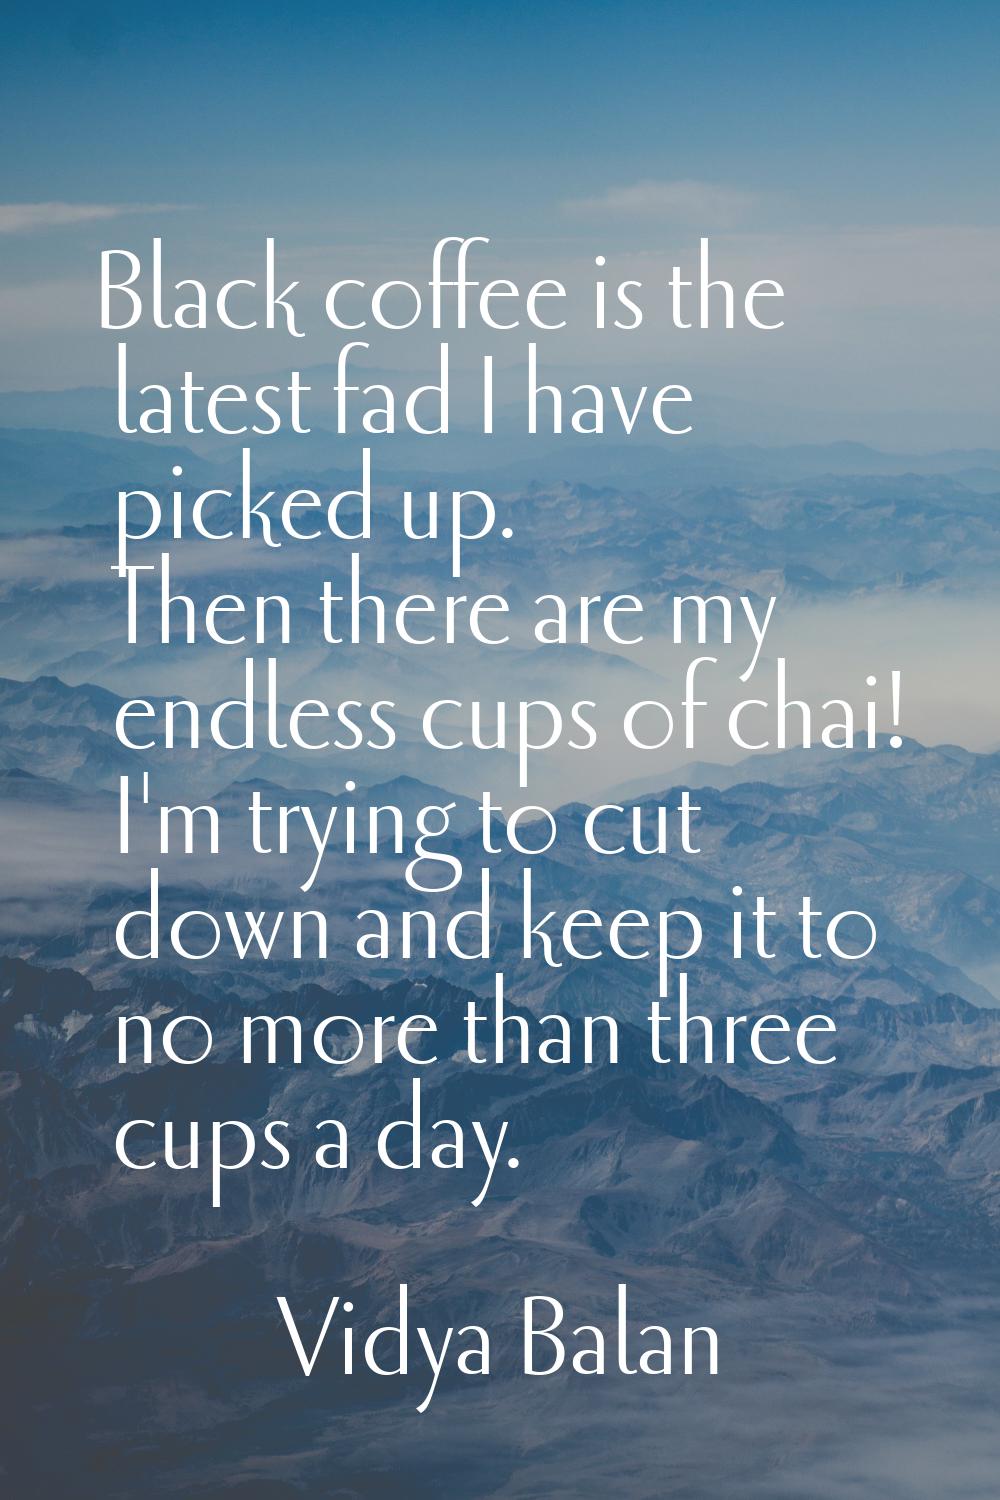 Black coffee is the latest fad I have picked up. Then there are my endless cups of chai! I'm trying